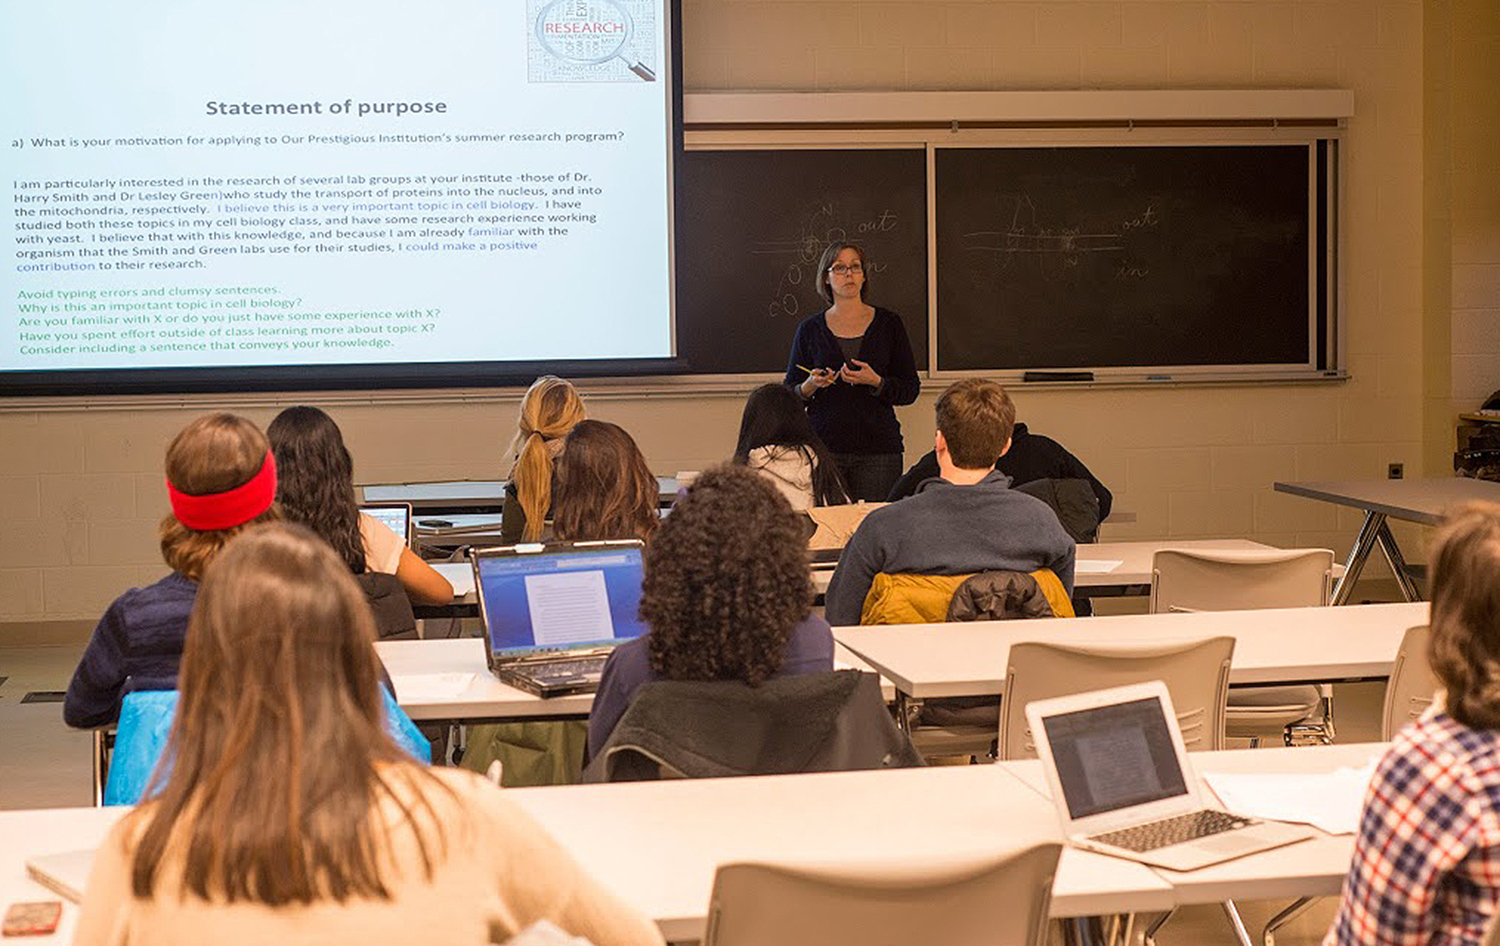 Students were required to attend both sessions and complete a mock application. The workshop also provided guidance on locating appropriate summer research programs and requesting supporting letters of recommendation.